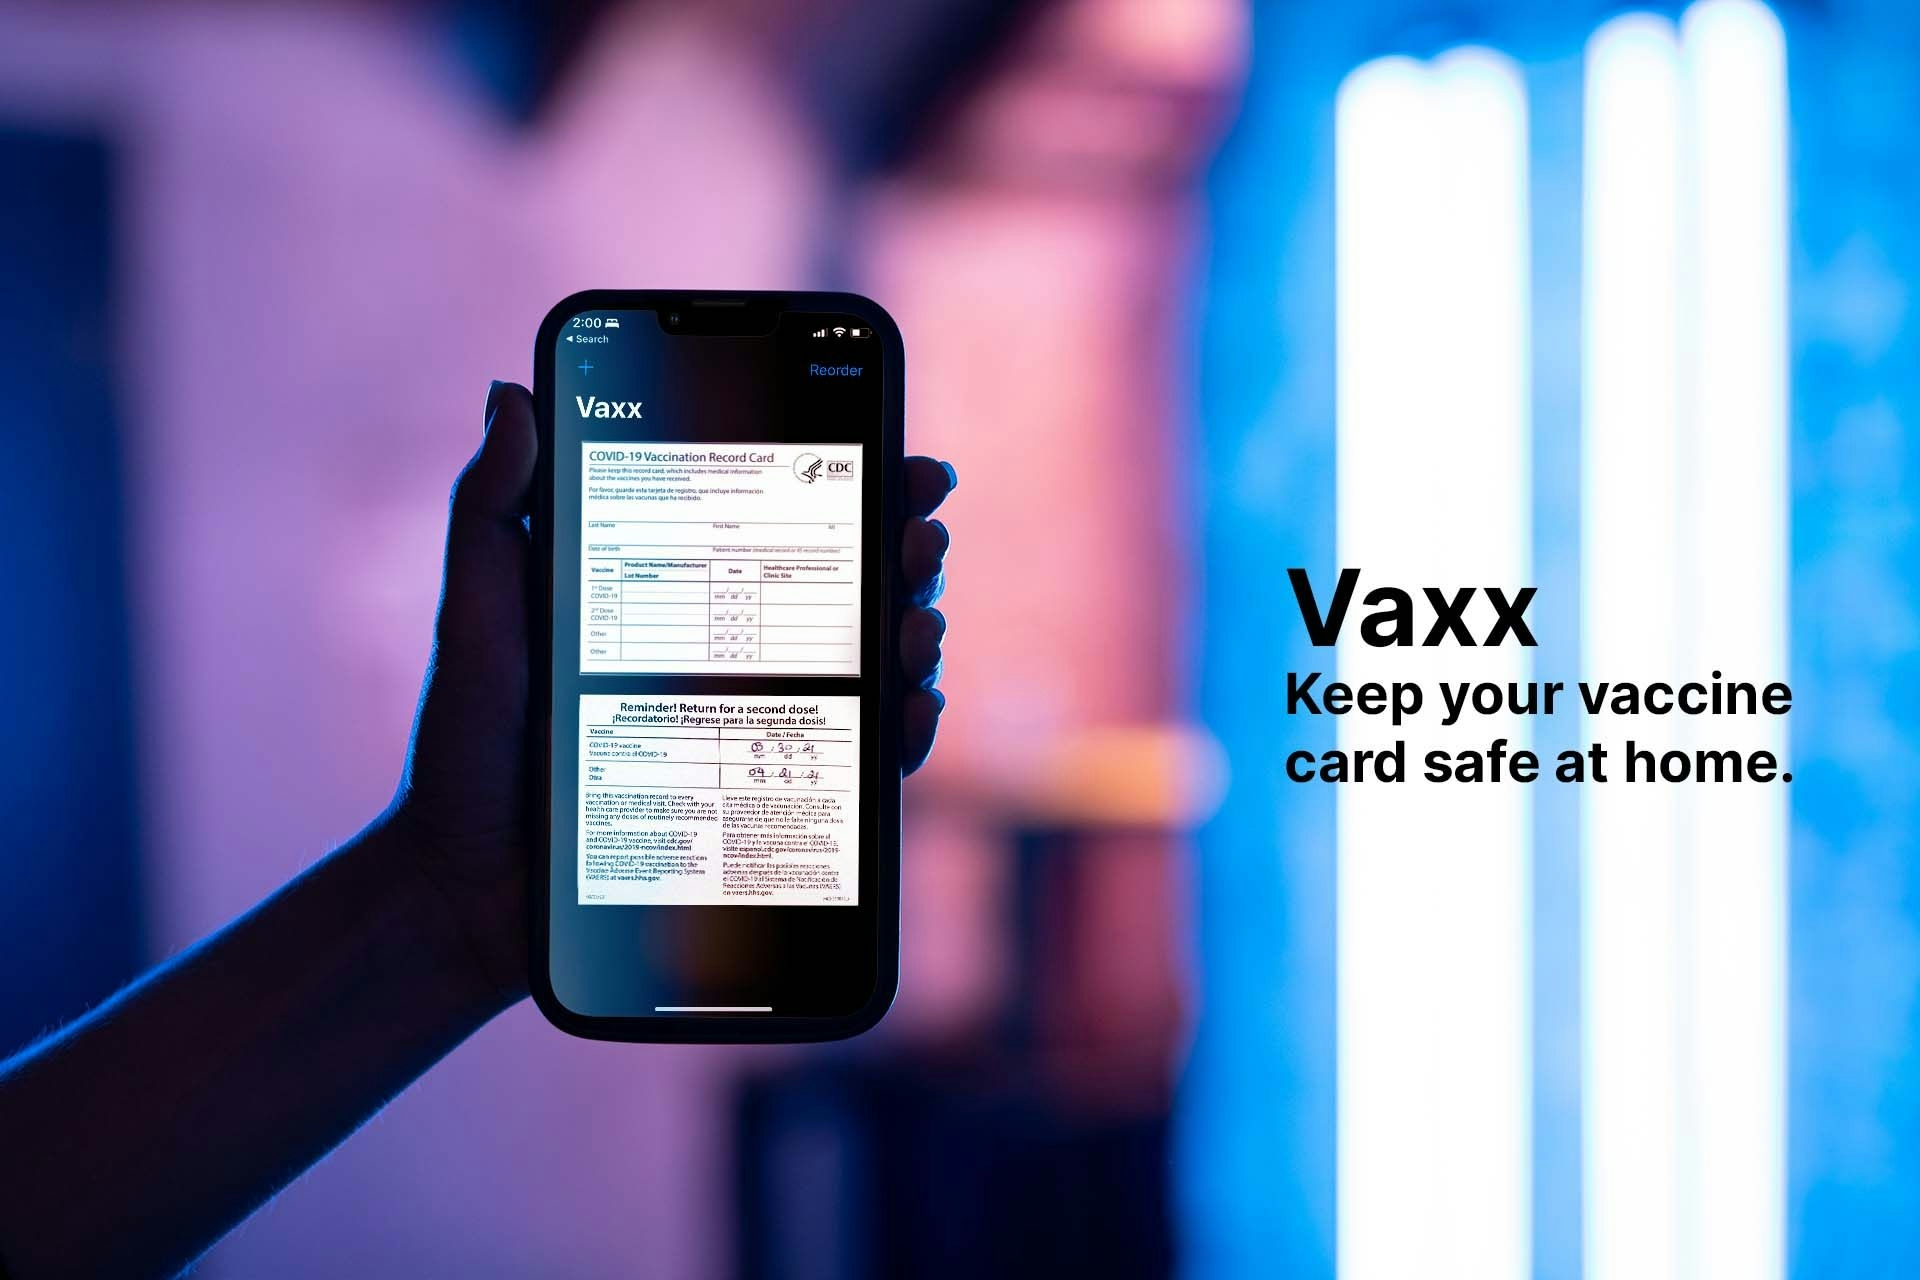 Vaxx Keep your vaccine card safe at home.